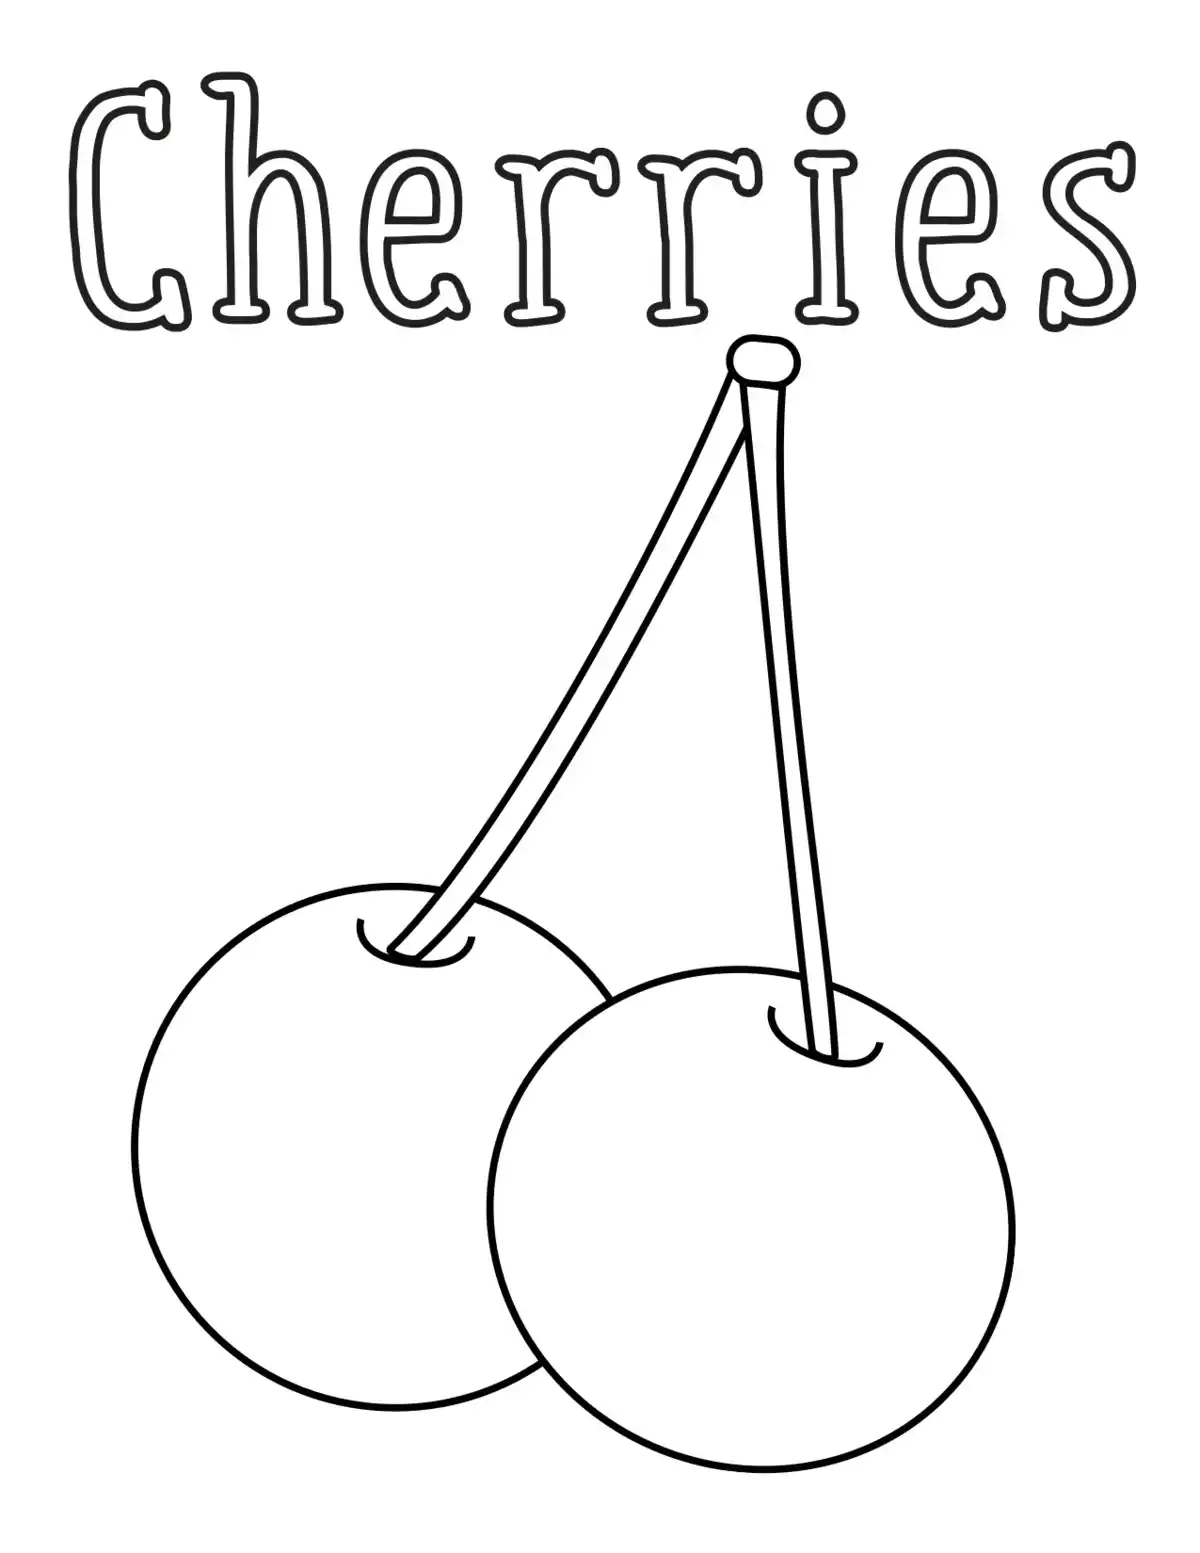 Cherries Fruit Kids Coloring Pages Pdf